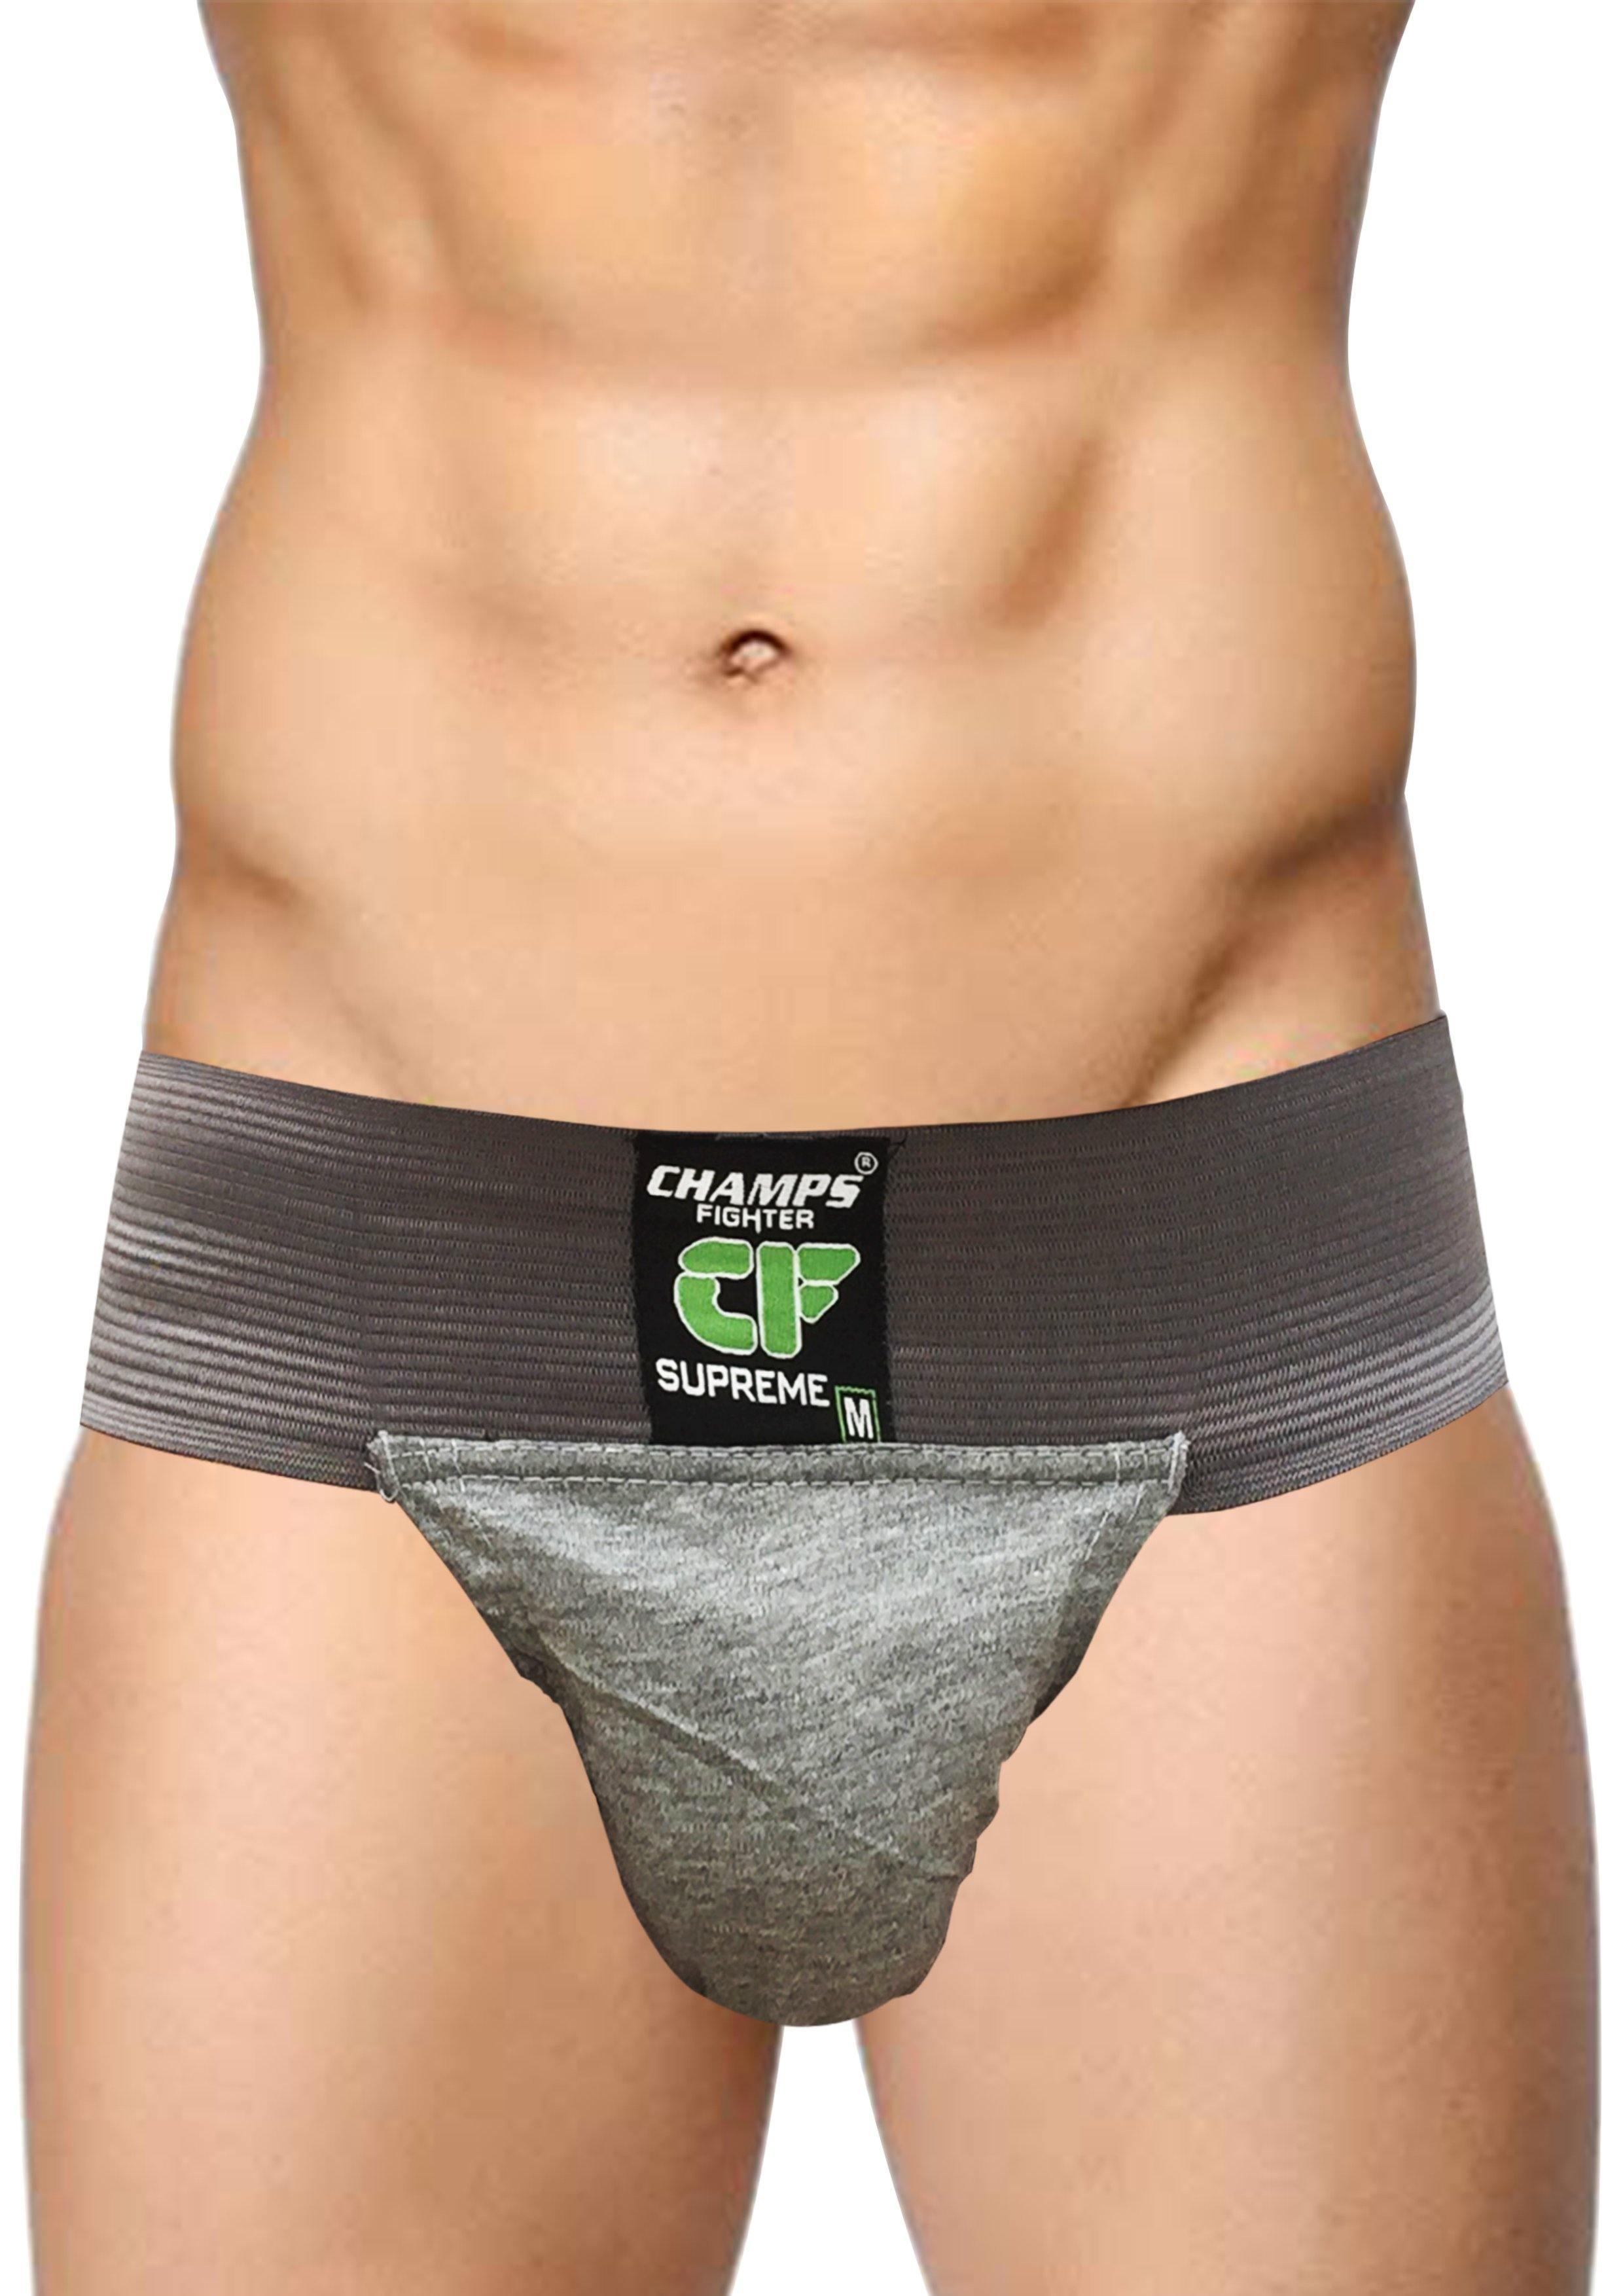 Champs fighter Back Cover Nexa Gym Cotton Sports underwear at Rs